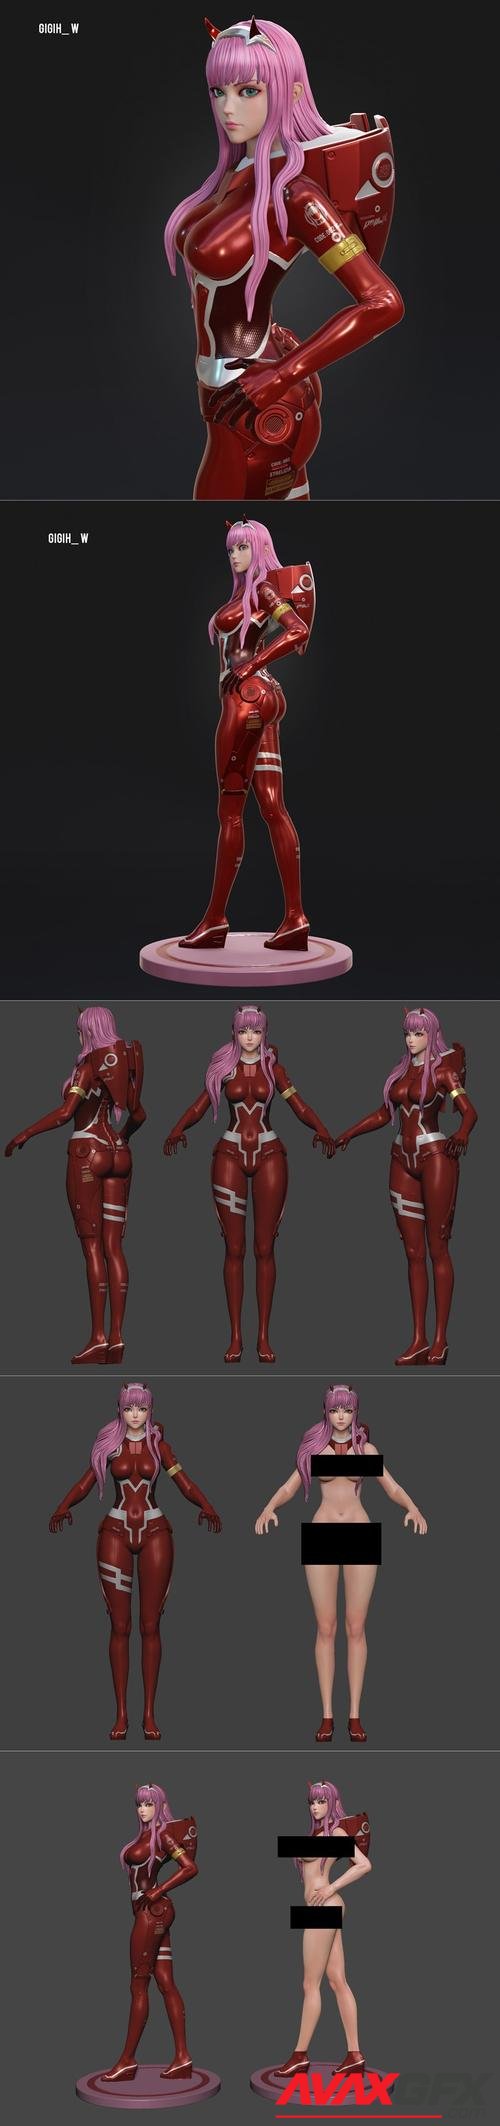 Zero Two From Darling In the FranXx – 3D Printable STL